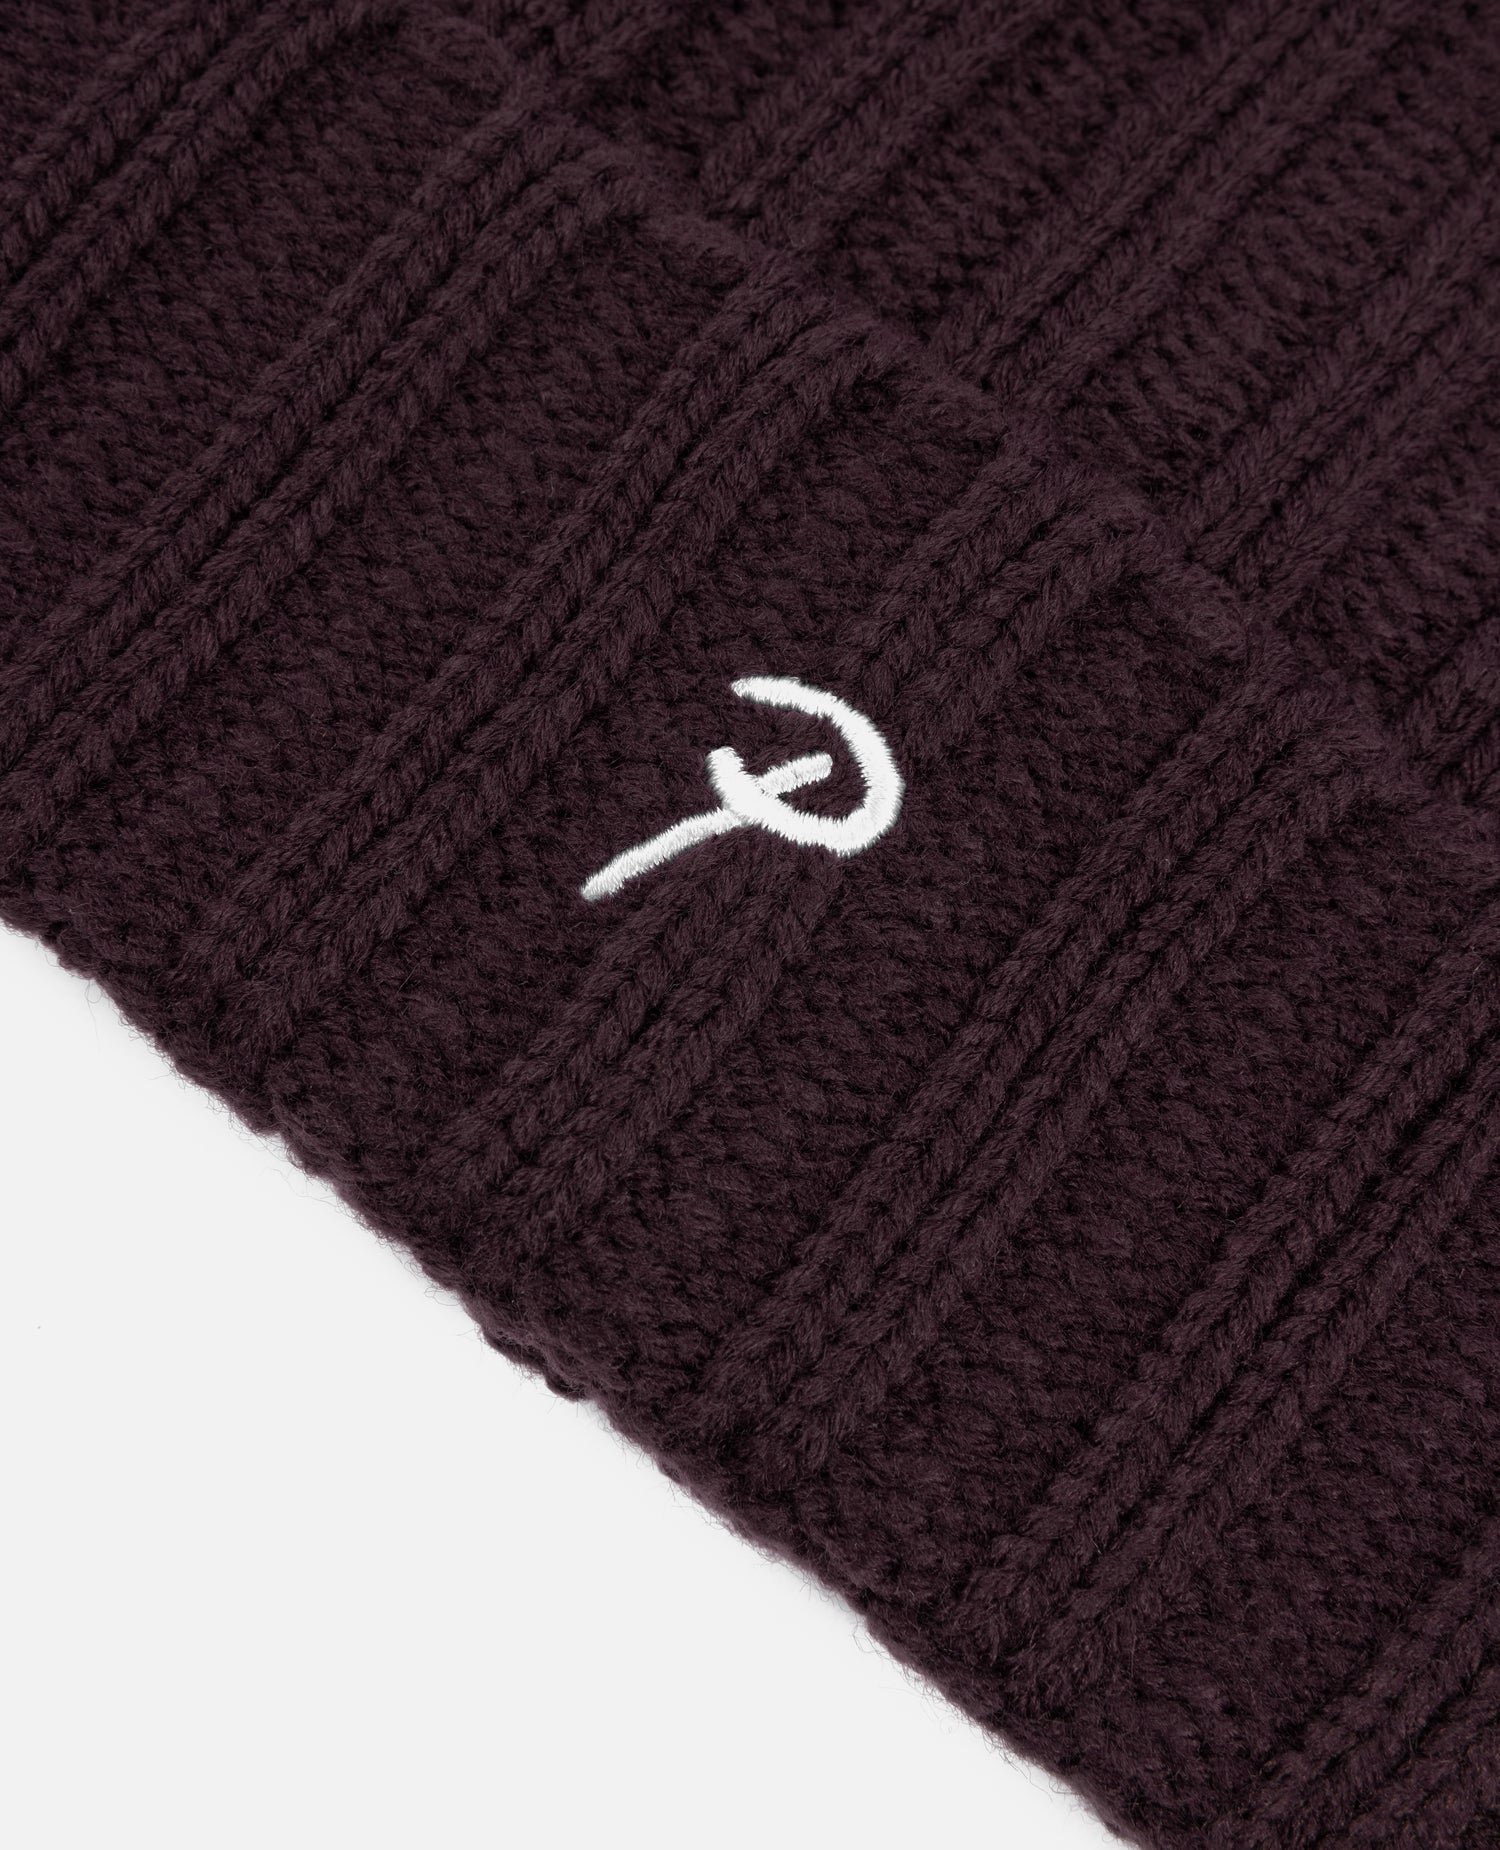 Patta Ribbed Knitted Beanie (Winetasting)